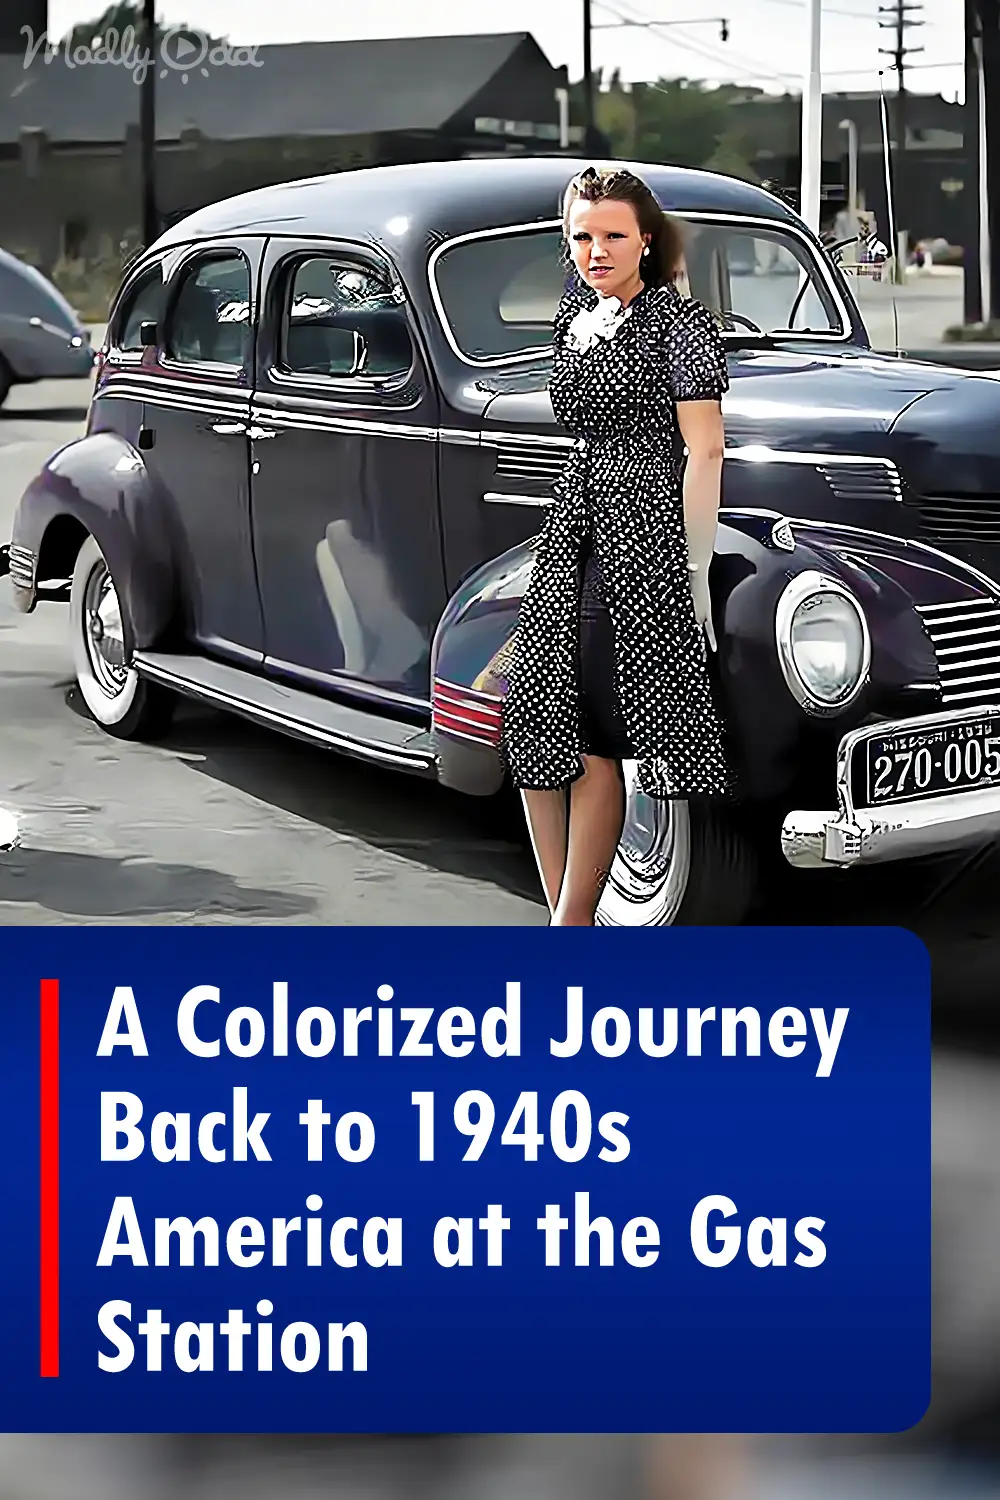 A Colorized Journey Back to 1940s America at the Gas Station